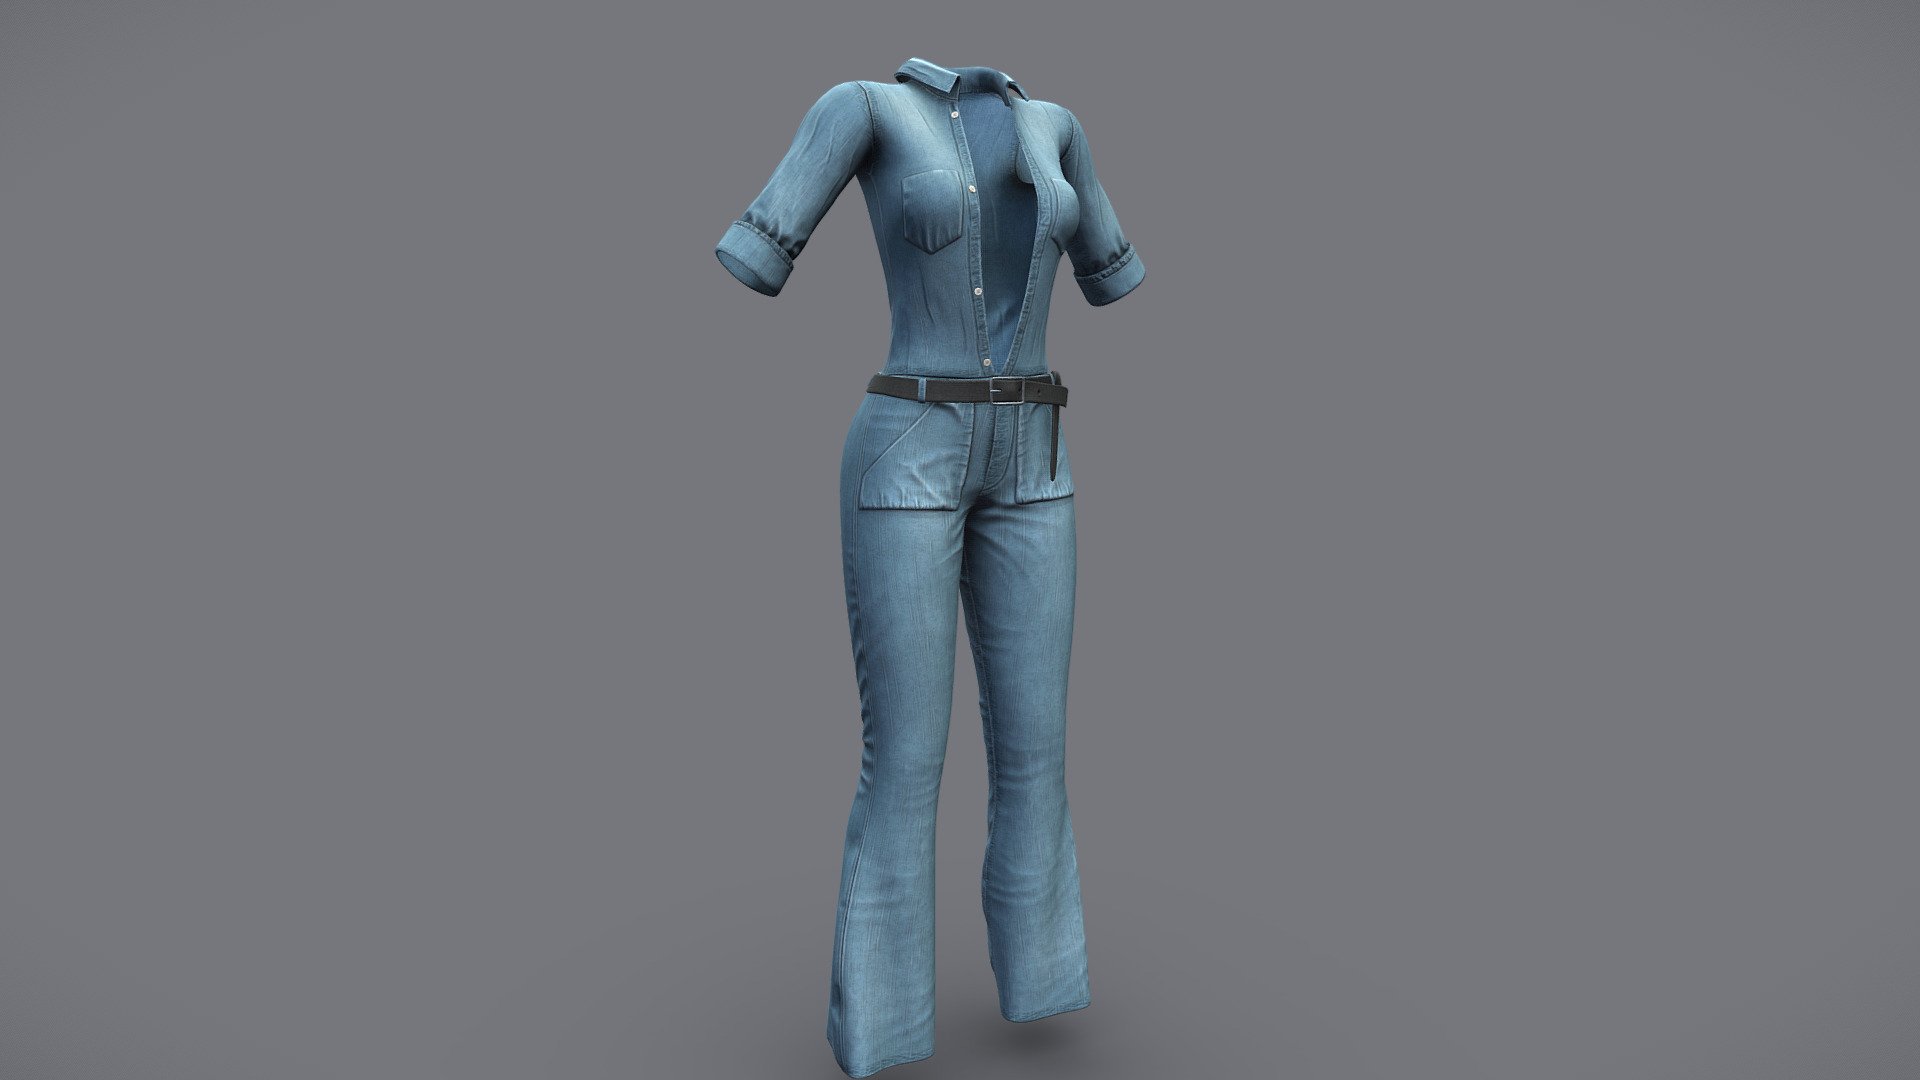 Can be fitted to any character

Clean topology

No overlapping smart optimized unwrapped UVs

High-quality realistic textures

FBX, OBJ, gITF, USDZ (request other formats)

PBR or Classic

Type     user:3dia &ldquo;search term